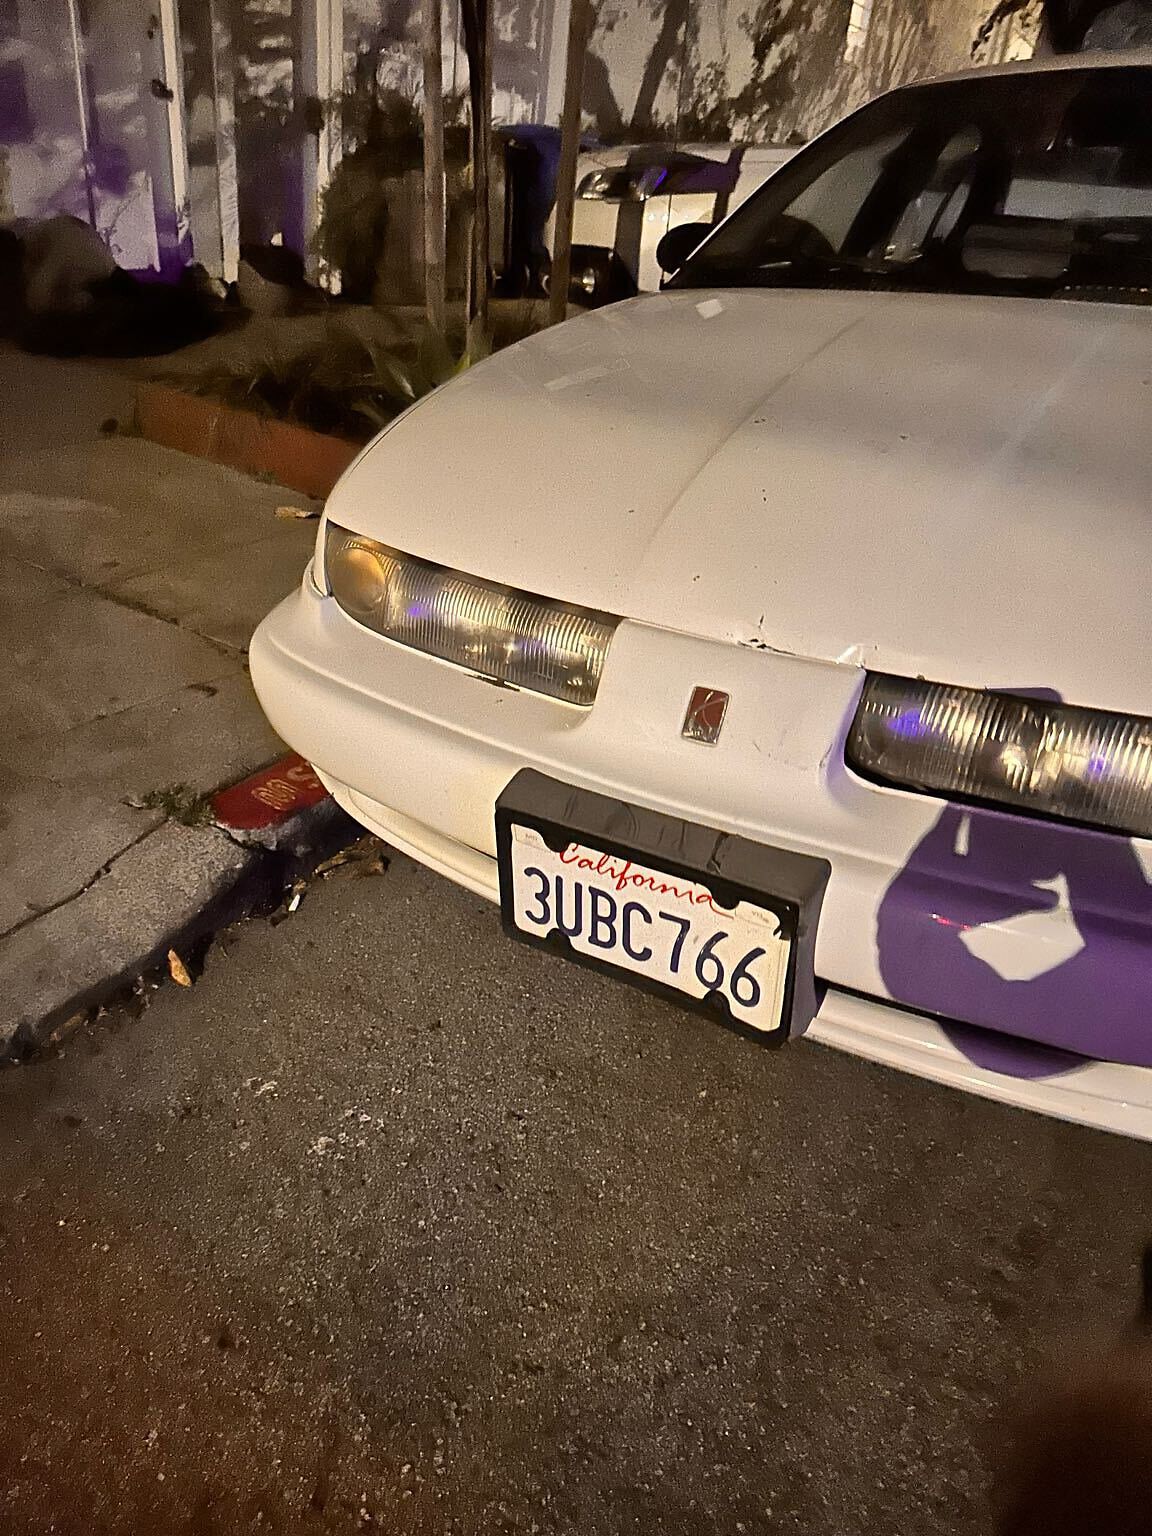 Photo of car in the street with license plate 3UBC766 in California